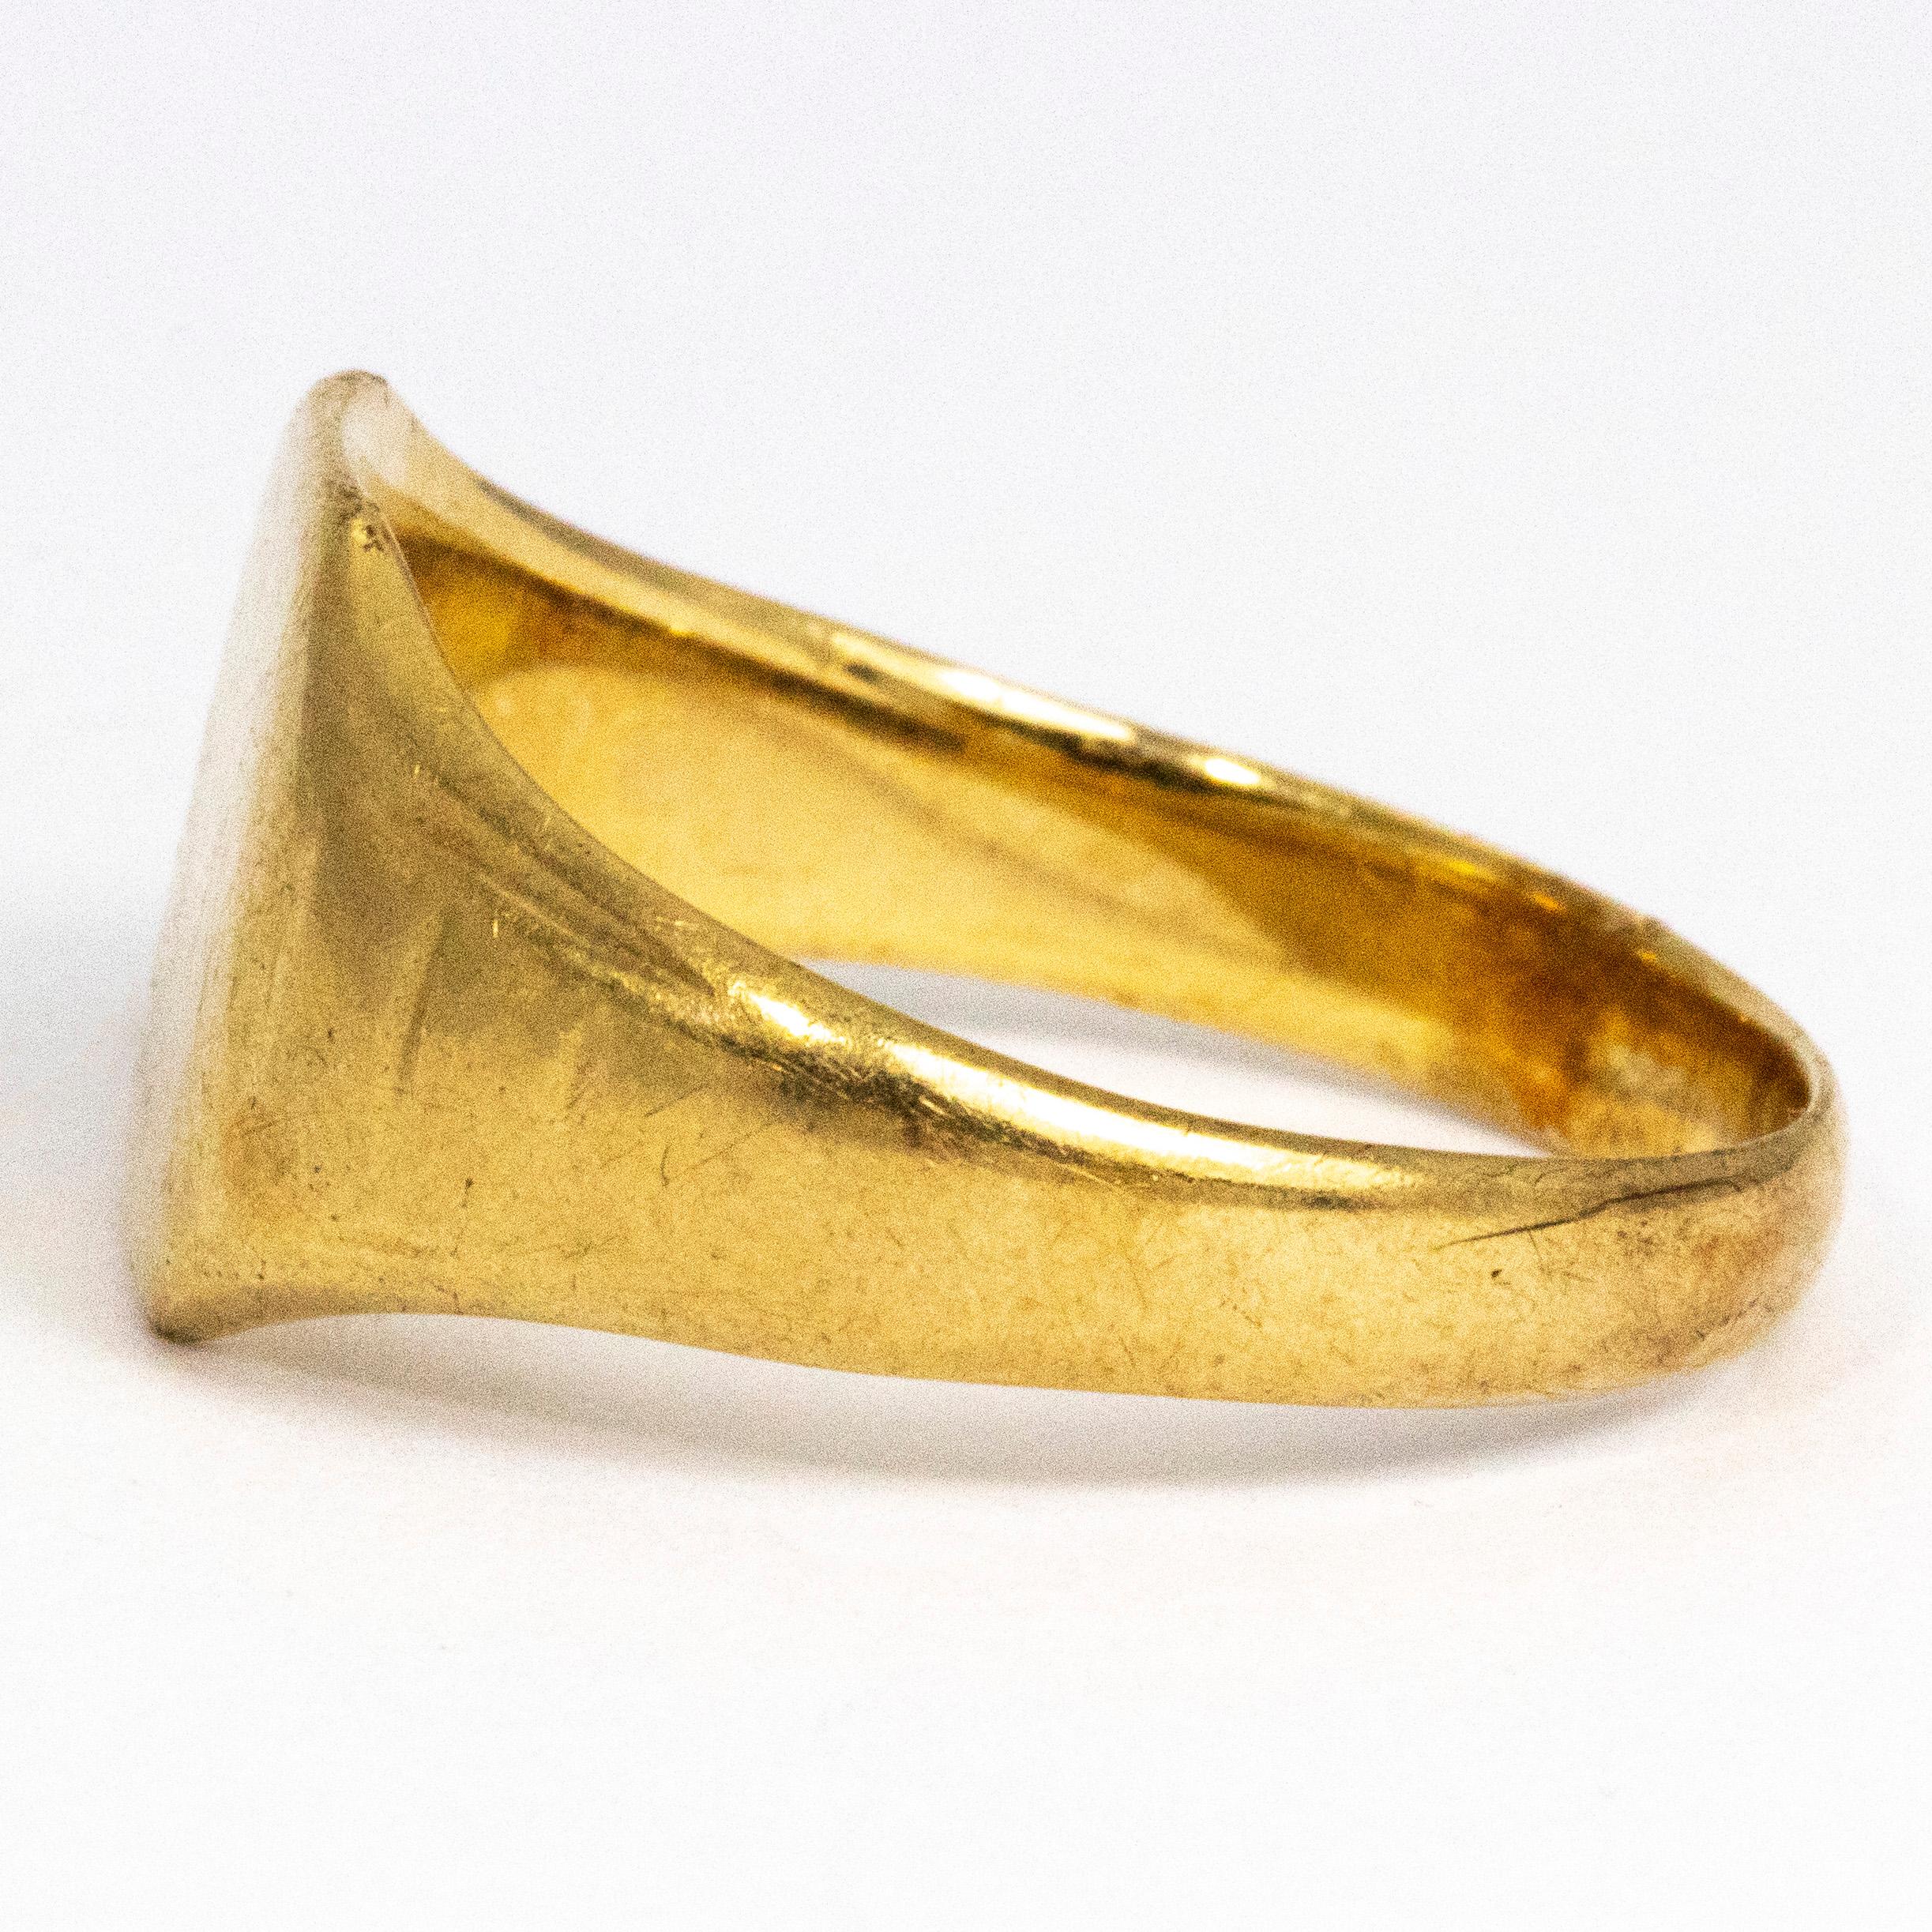 This glossy 9ct gold signet ring has a square front and the shoulders have a very faint line detail to them. The ring has a very smooth yet chunky feel to it.

Ring Size: V or 10 1/2